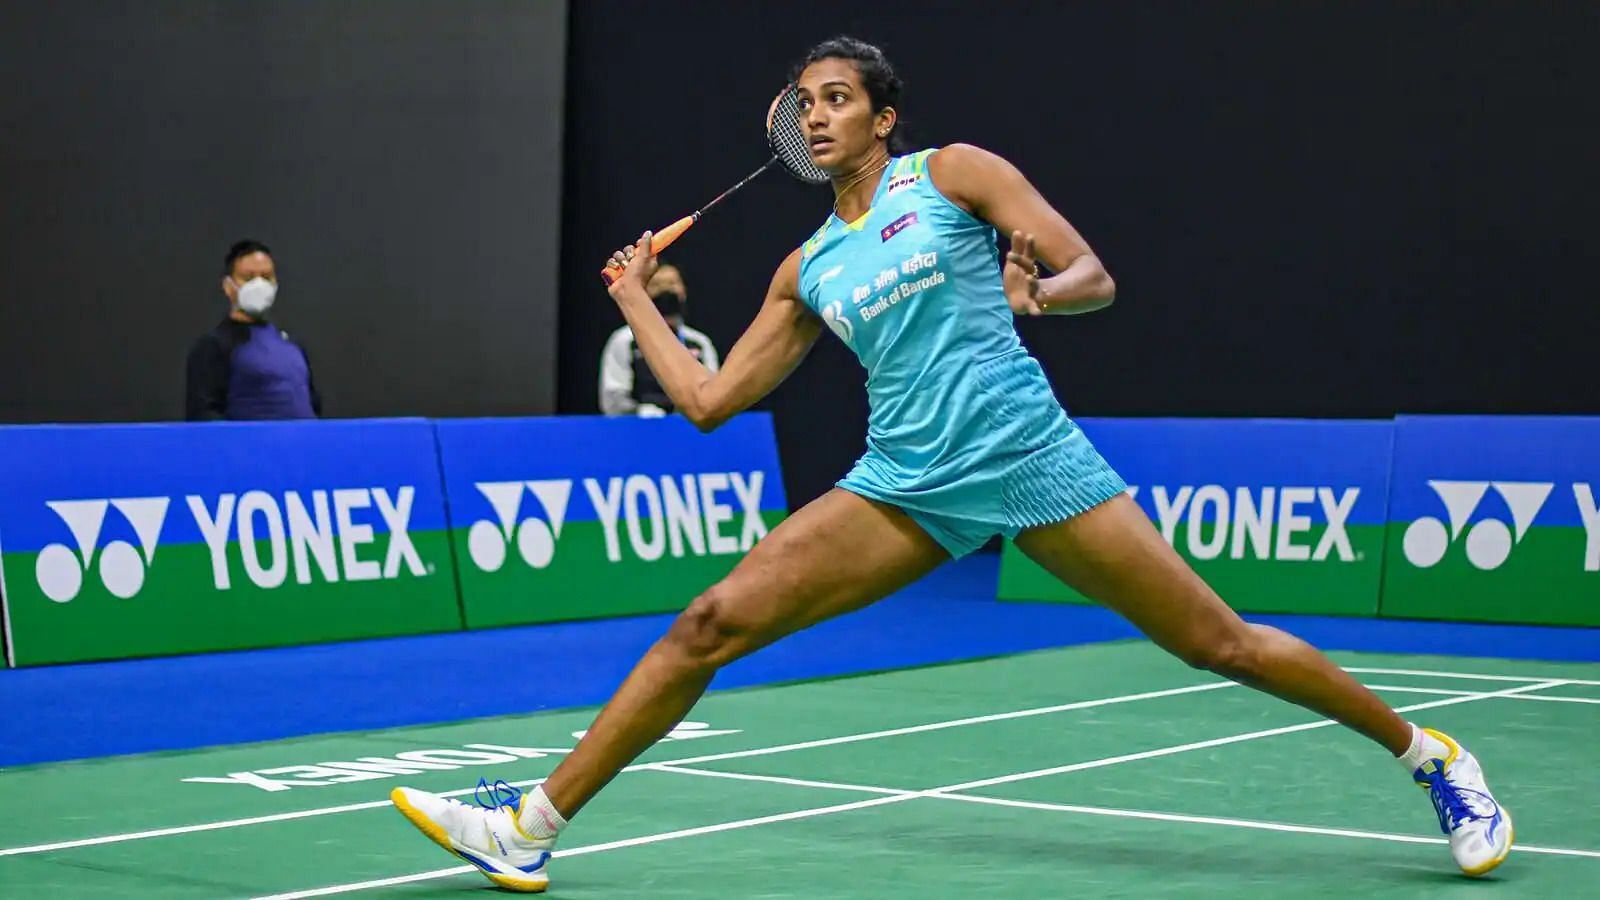 PV Sindhu and Carolina Marin will clash at the semi-finals of the Denmark Open